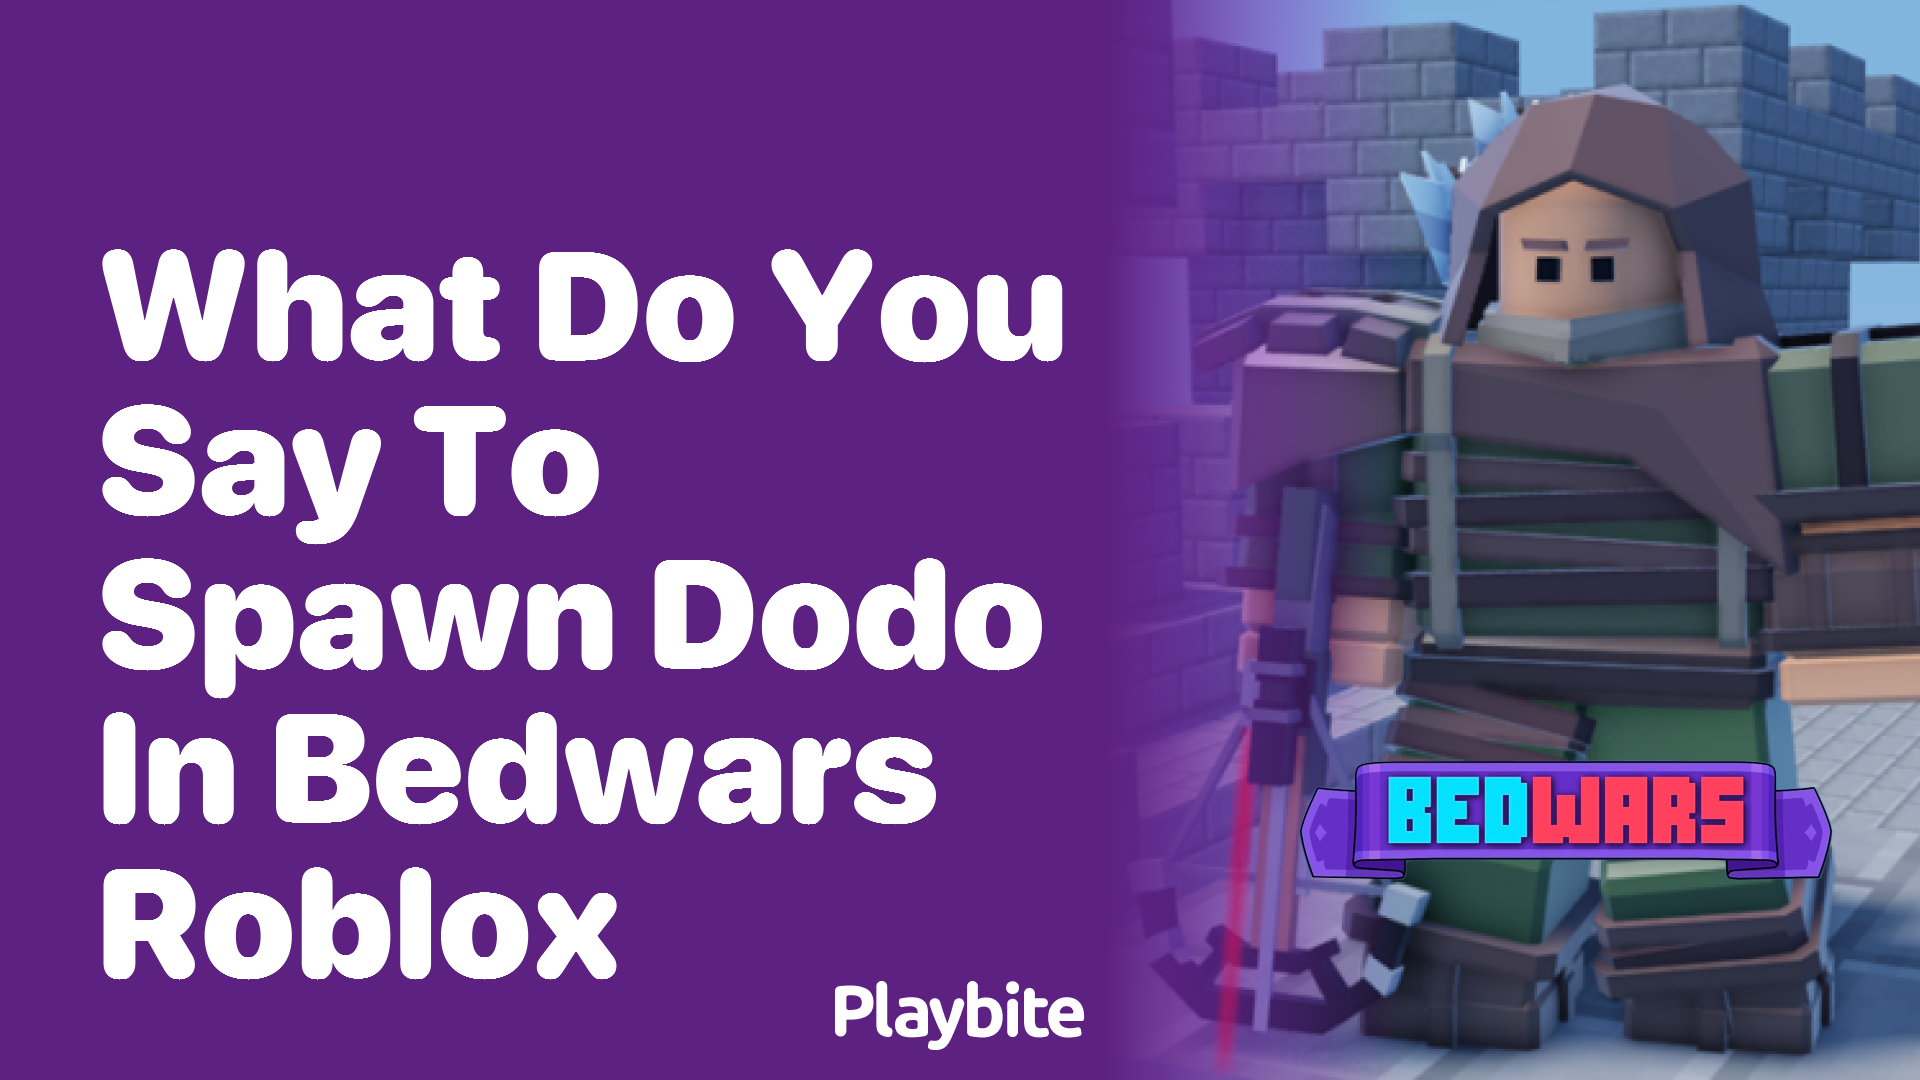 What do you say to spawn a Dodo in Bedwars Roblox?